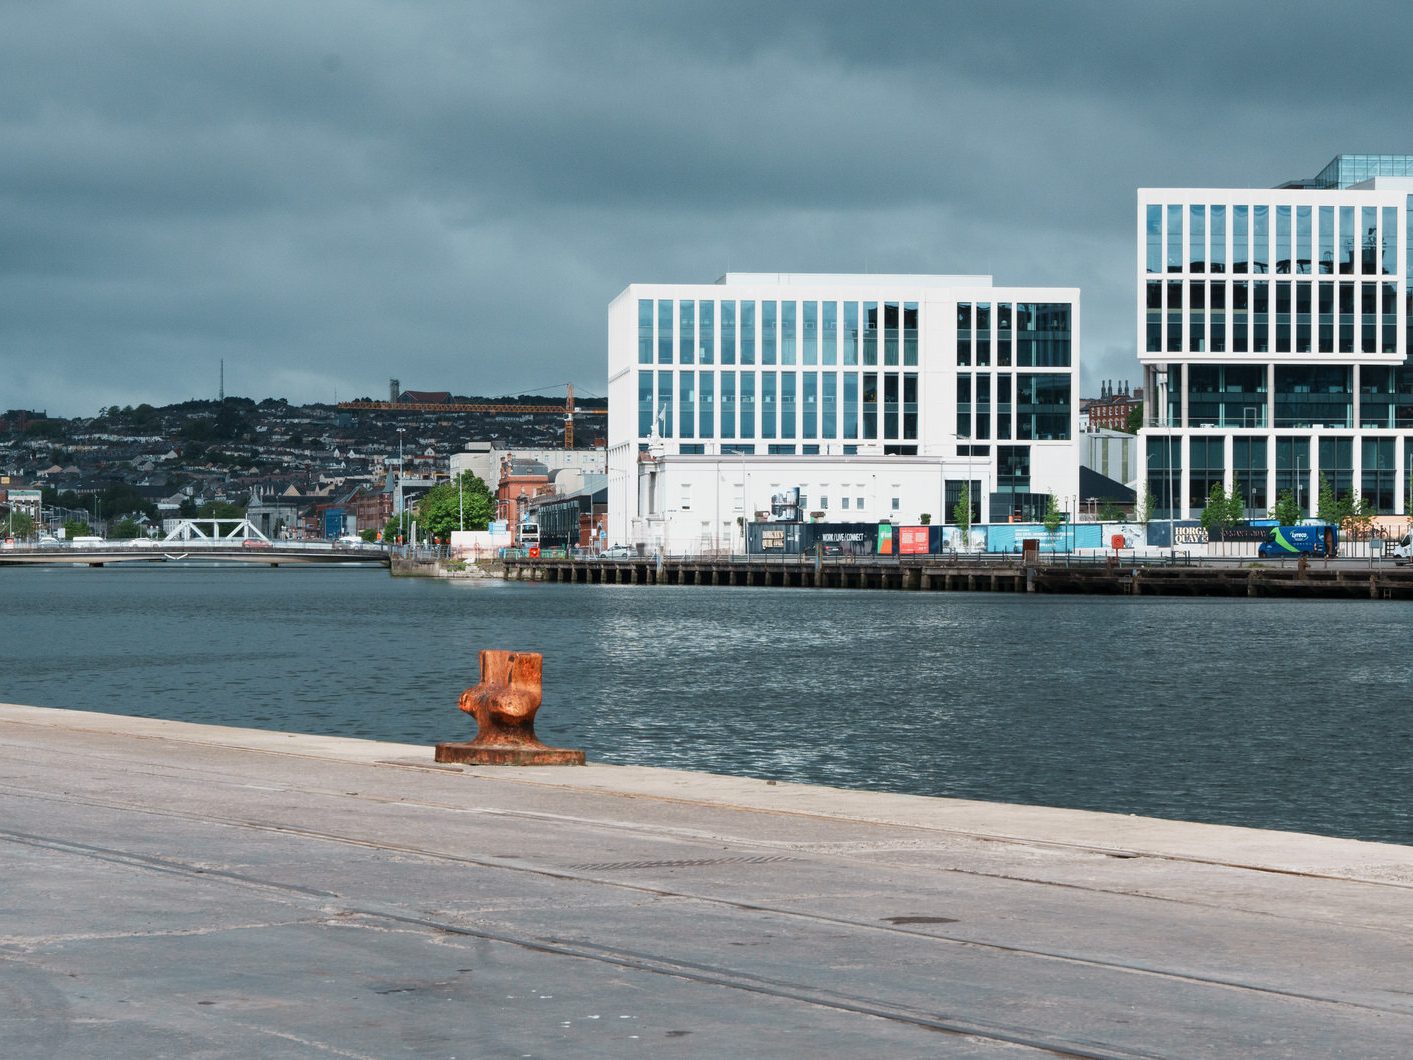 EVERY TIME I VISIT CORK IT RAINS [KENNEDY QUAY SECONDS BEFORE A THUNDER STORM ARRIVED] 019